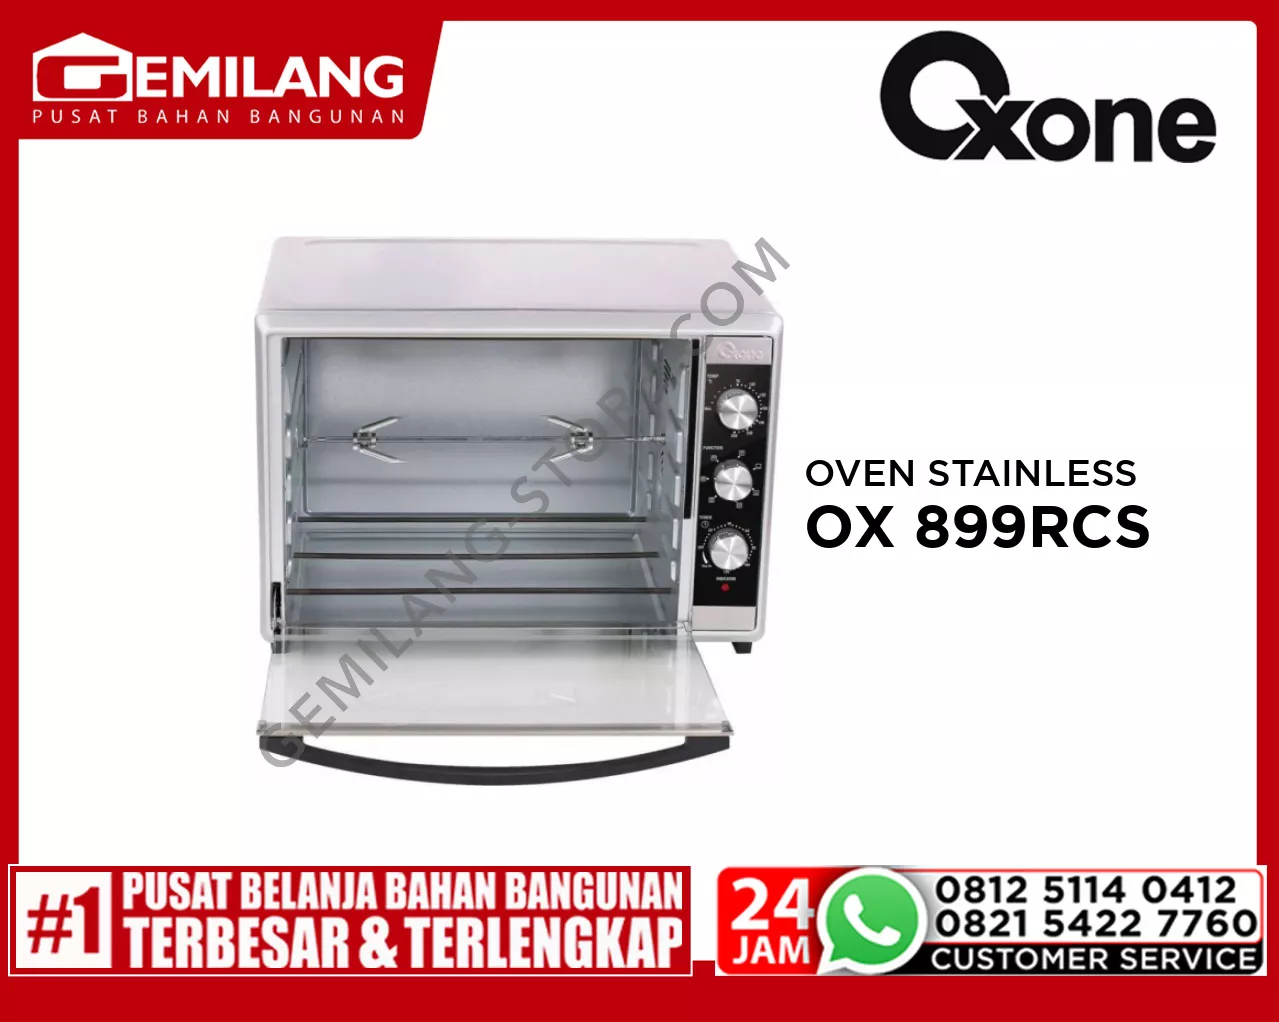 OXONE GIANT OVEN STAINLESS STELL 52ltr OX 899RCS